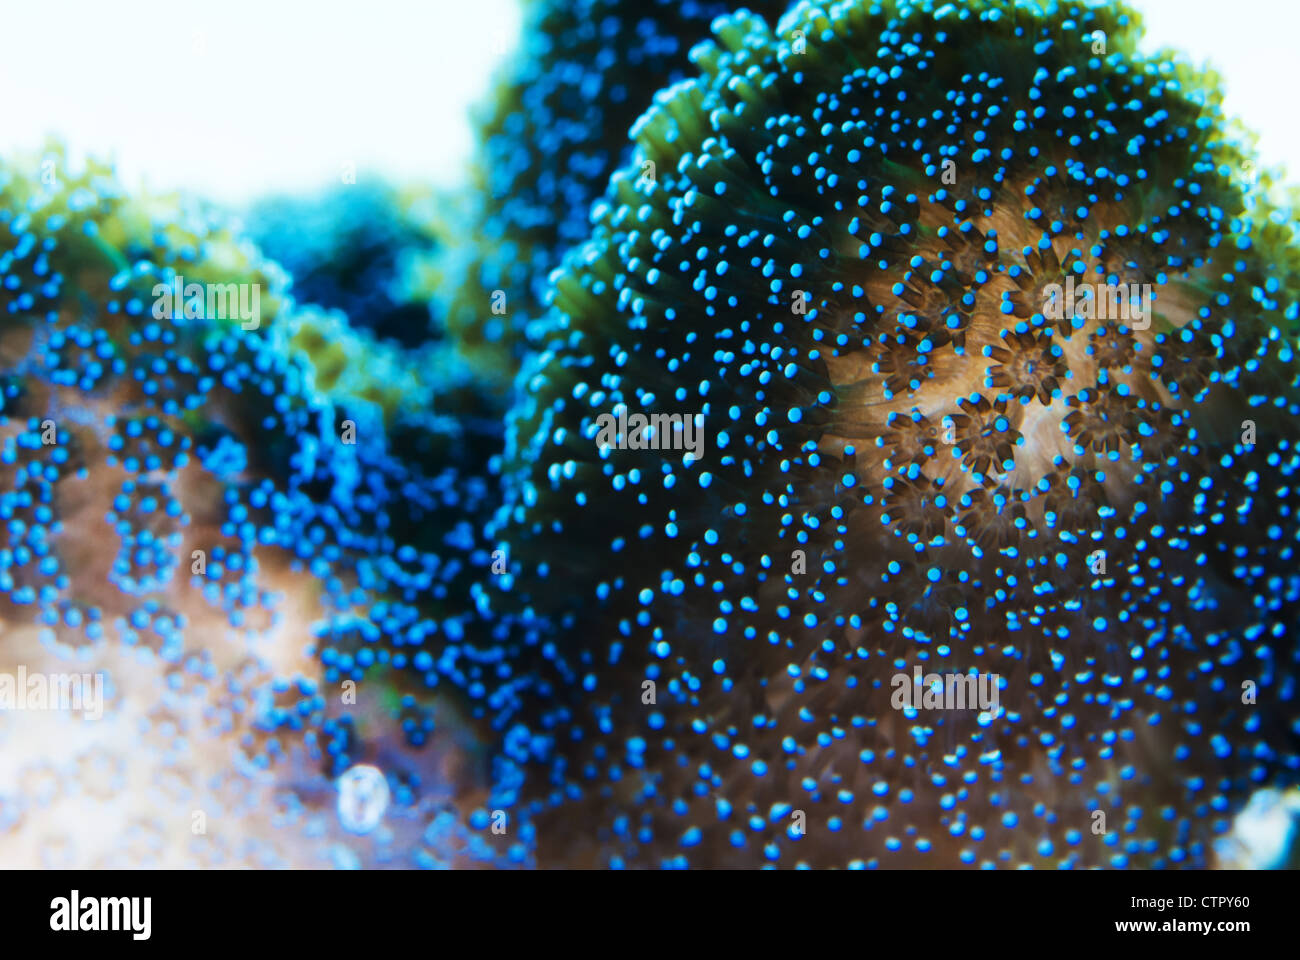 This is an image of coral polyps Stock Photo